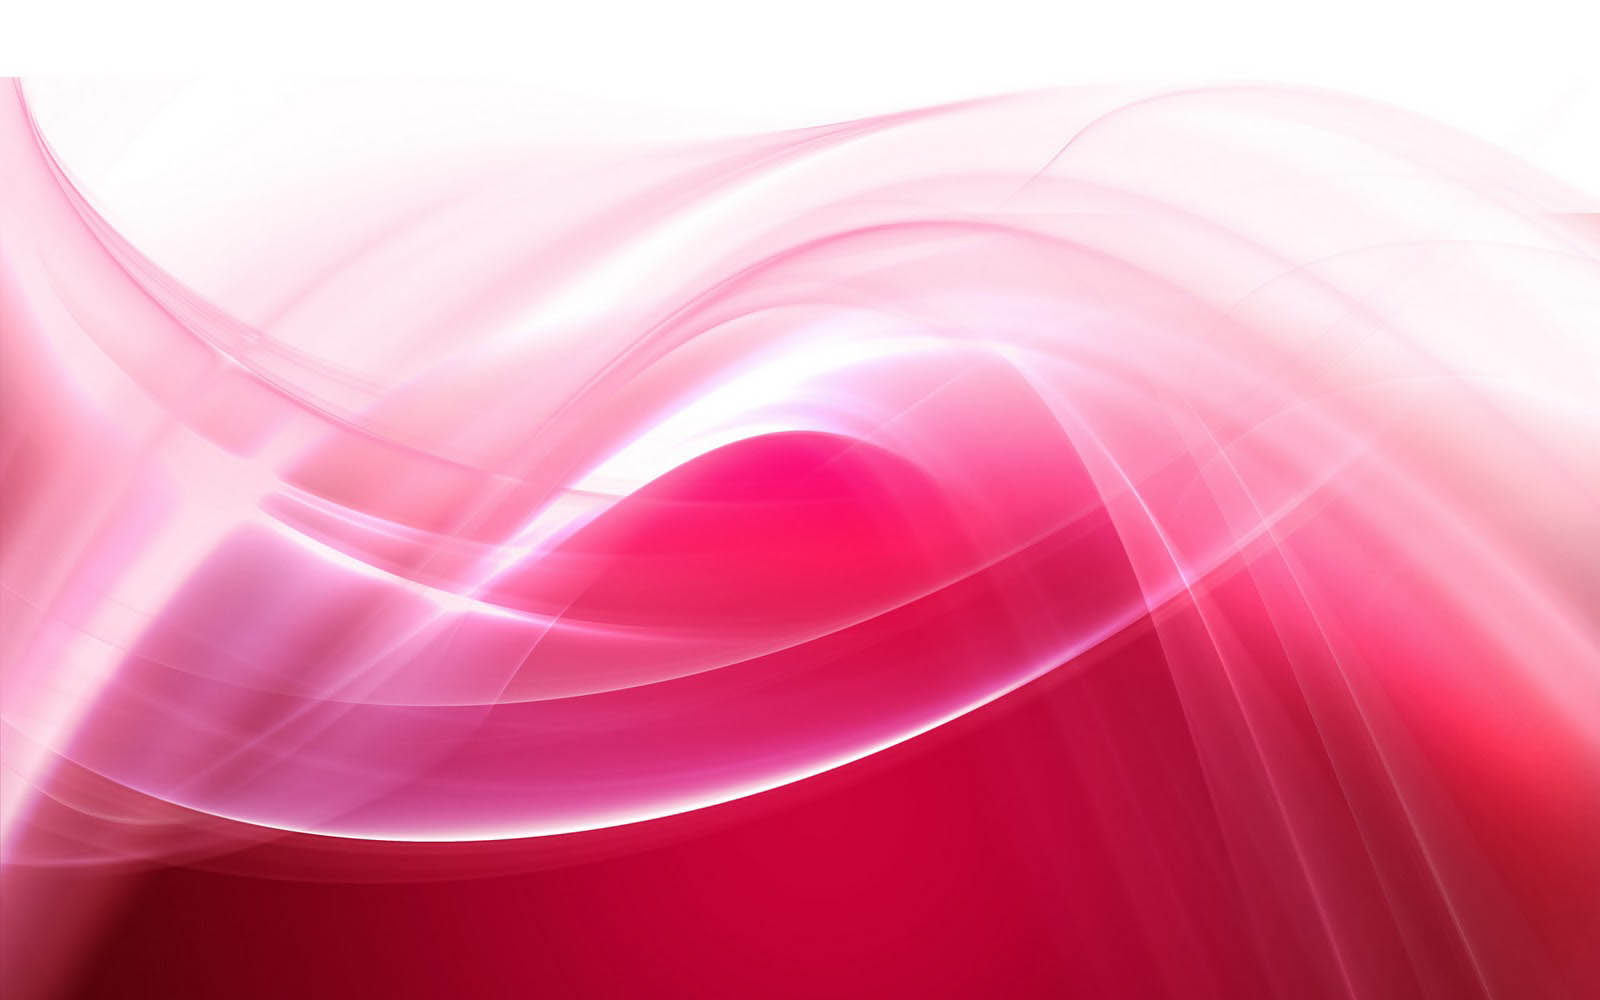 Gallery Mangklex HOT 2013 Popular Abstract Pink Wallpapers